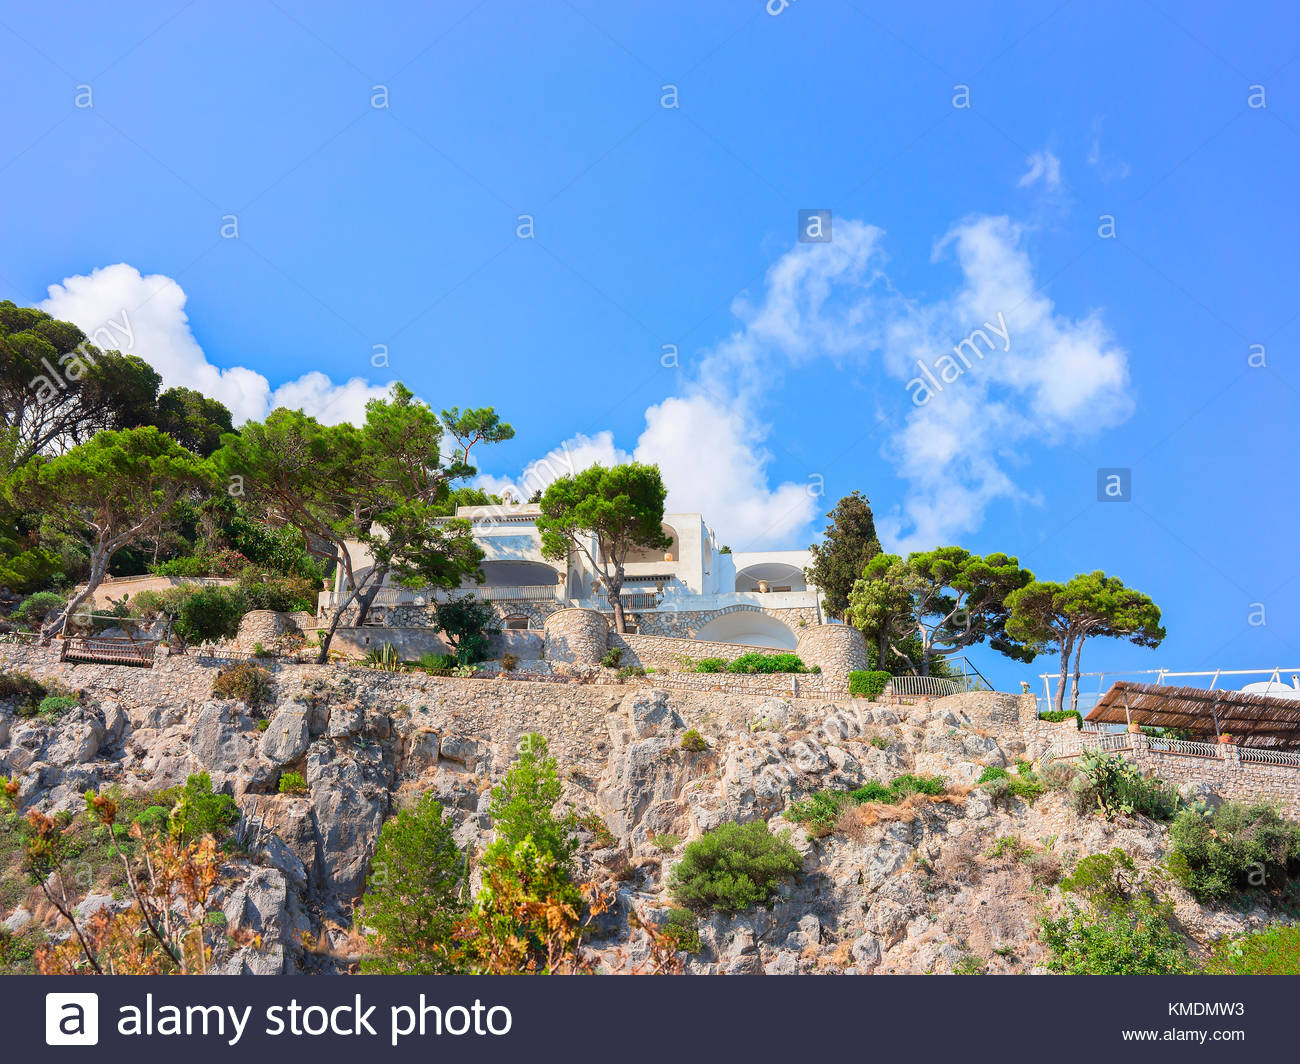 Villa In Capri Island With Mountain On The Background Italy Stock